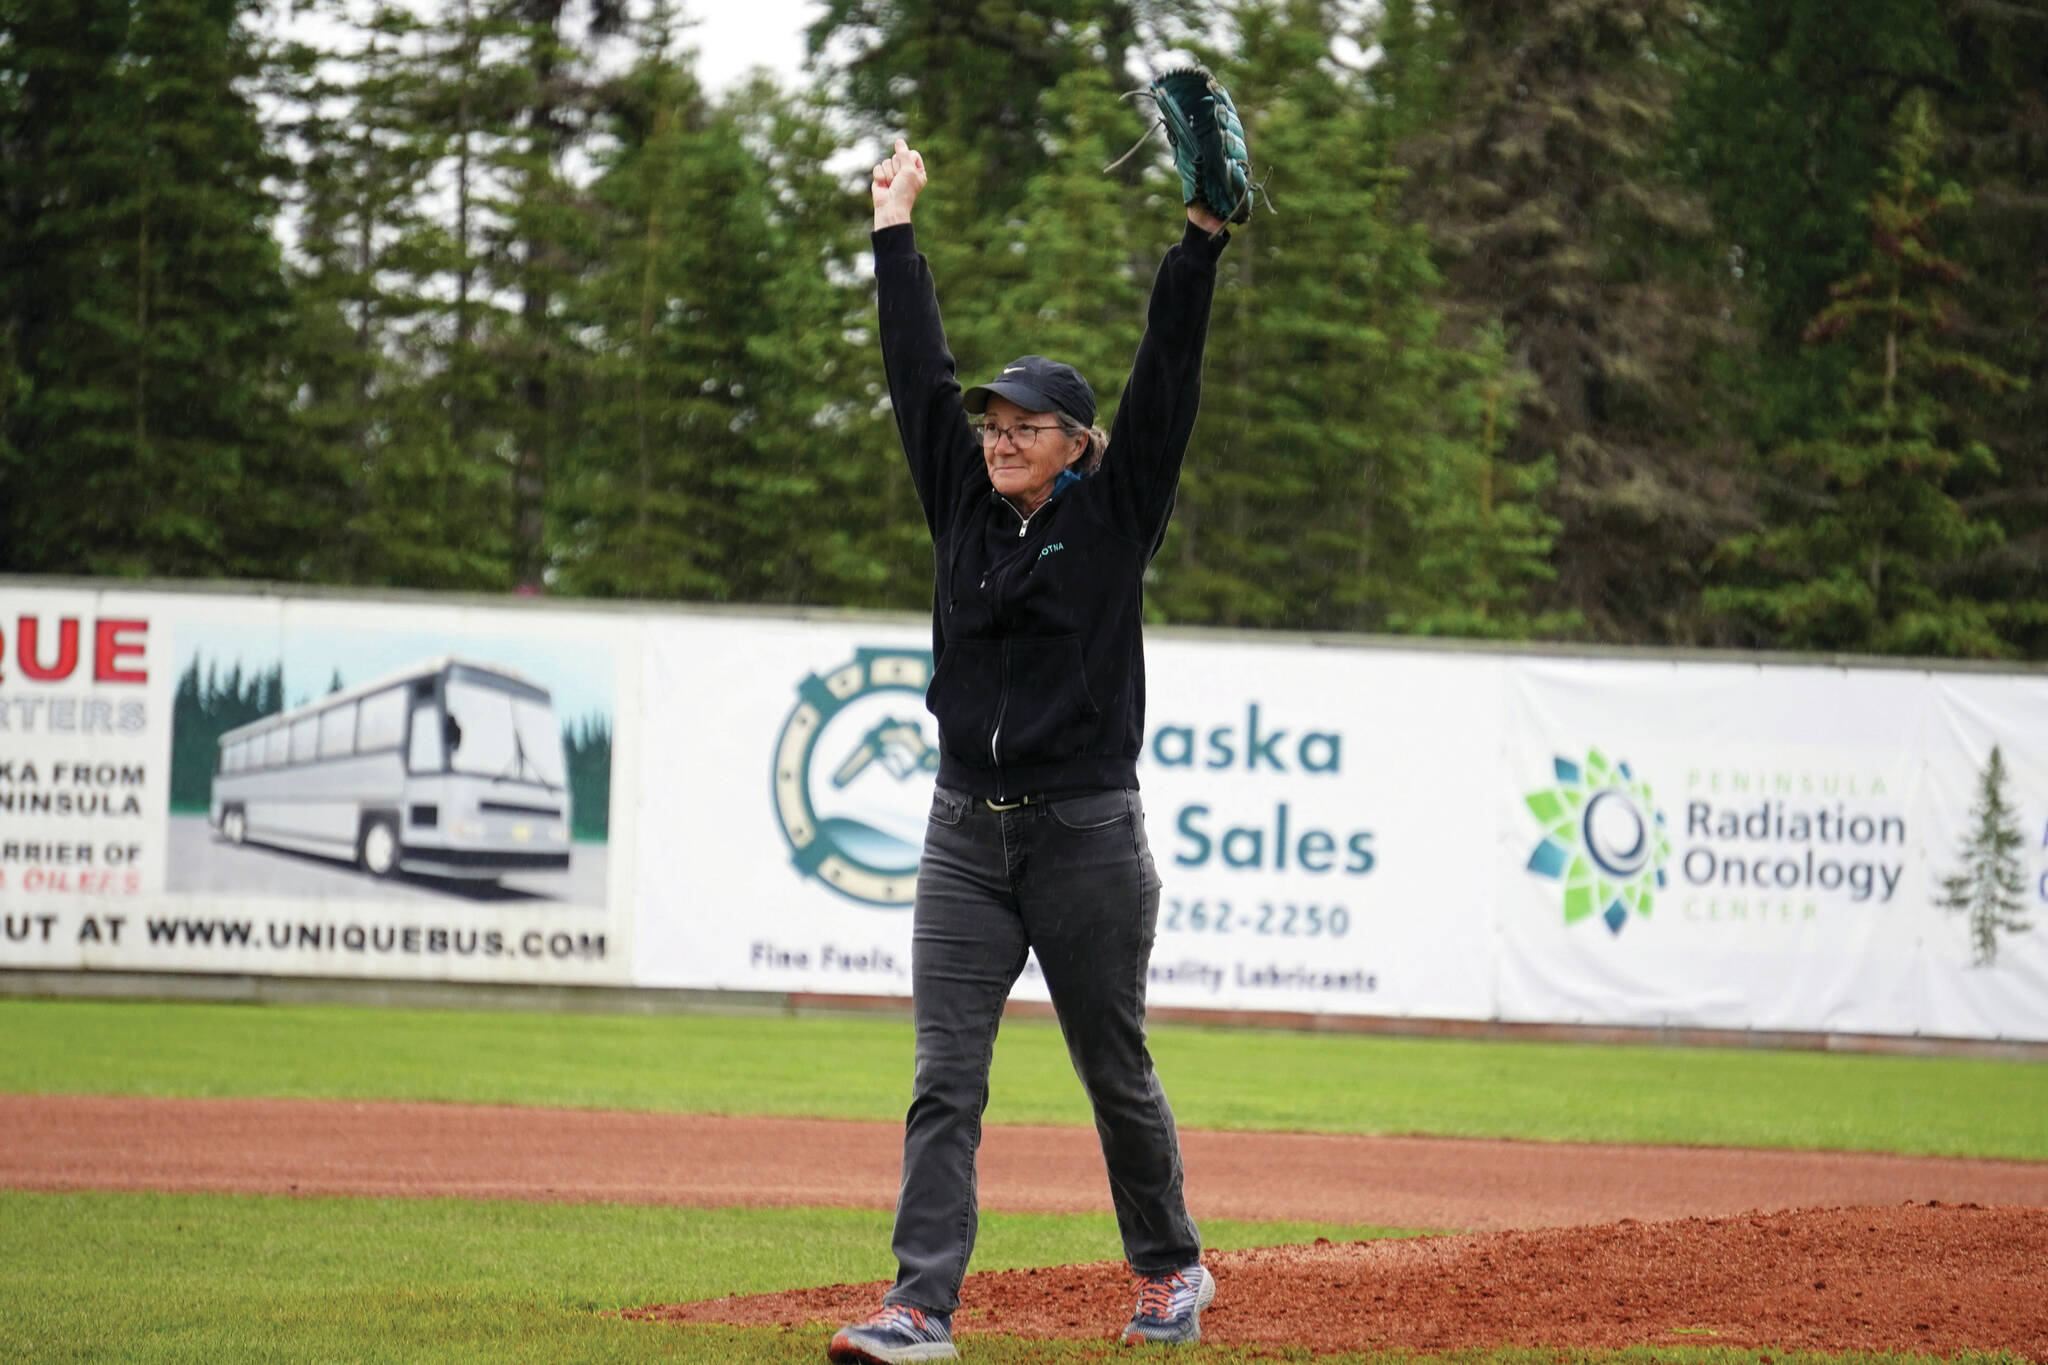 Jake Dye/Peninsula Clarion
Lisa Parker, vice mayor of Soldotna, celebrates after throwing the ceremonial first pitch before a game between the Peninsula Oilers and the Mat-Su Miners on Tuesday, July 4, 2023, at Coral Seymour Memorial Park in Kenai.